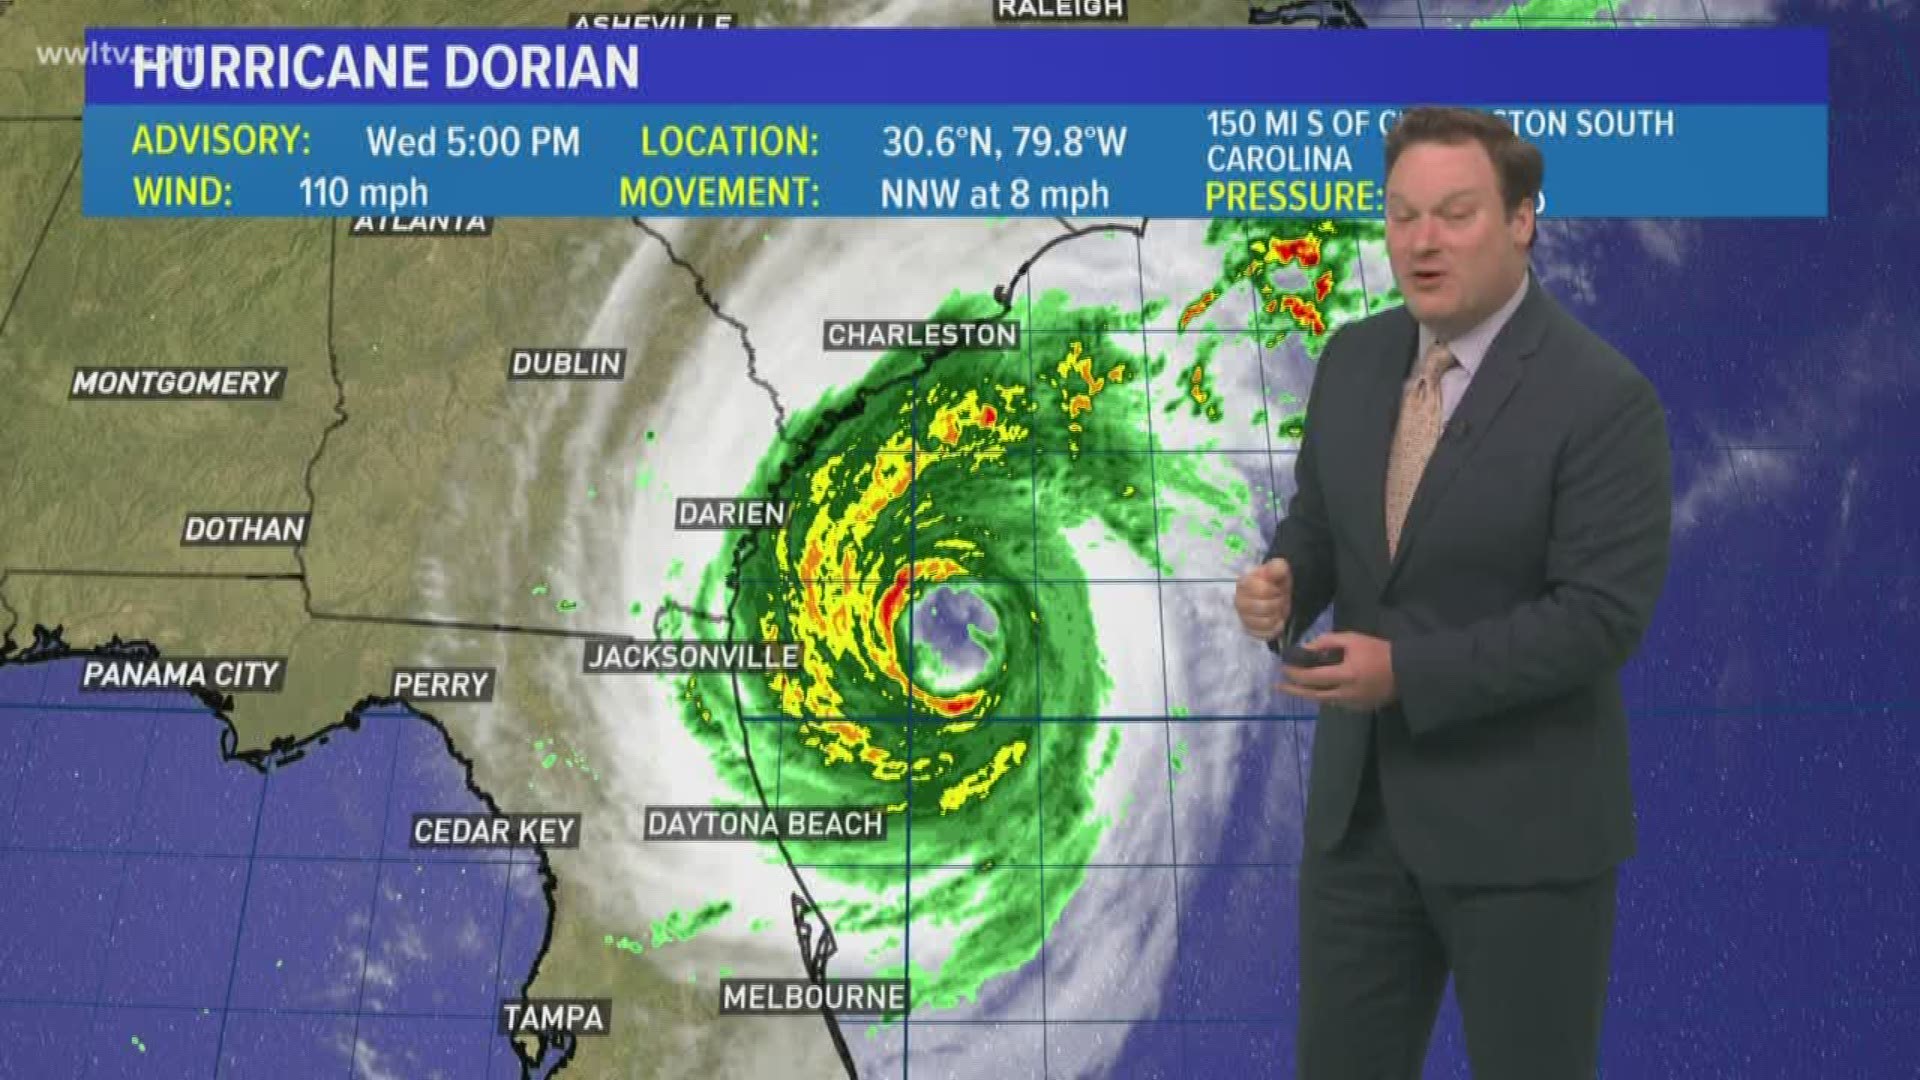 Hurricane Dorian is finally moving away from the Florida coast and approaching South Carolina. The 5 pm Wednesday update shows the latest tracks, models and forecast.